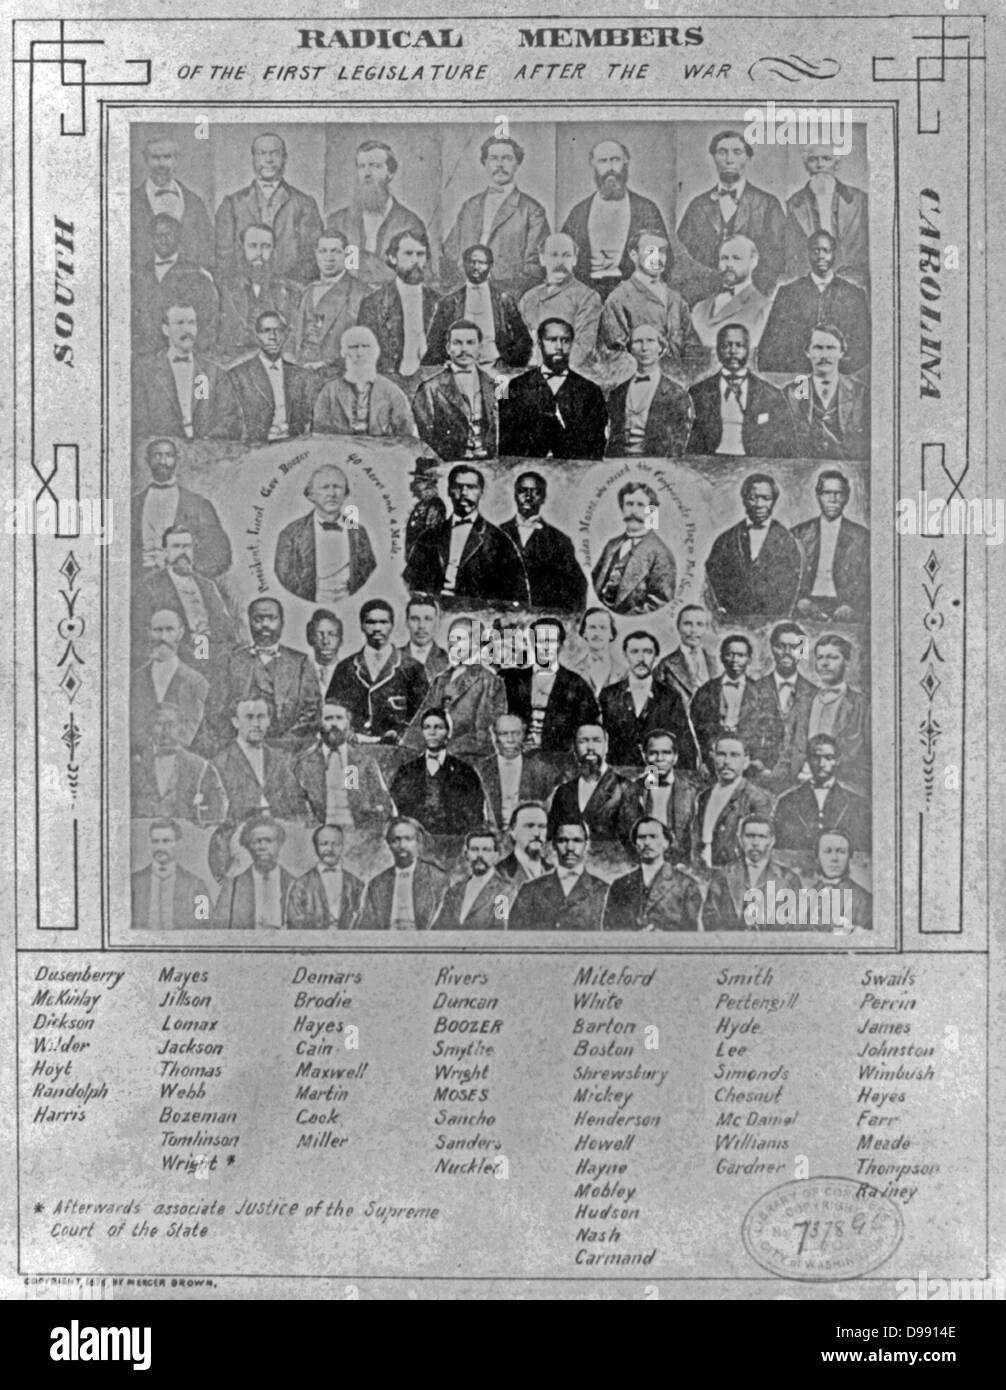 Photomontage of radical members of the first South Carolina legislature after the American Civil War. Each member is identified. Stock Photo